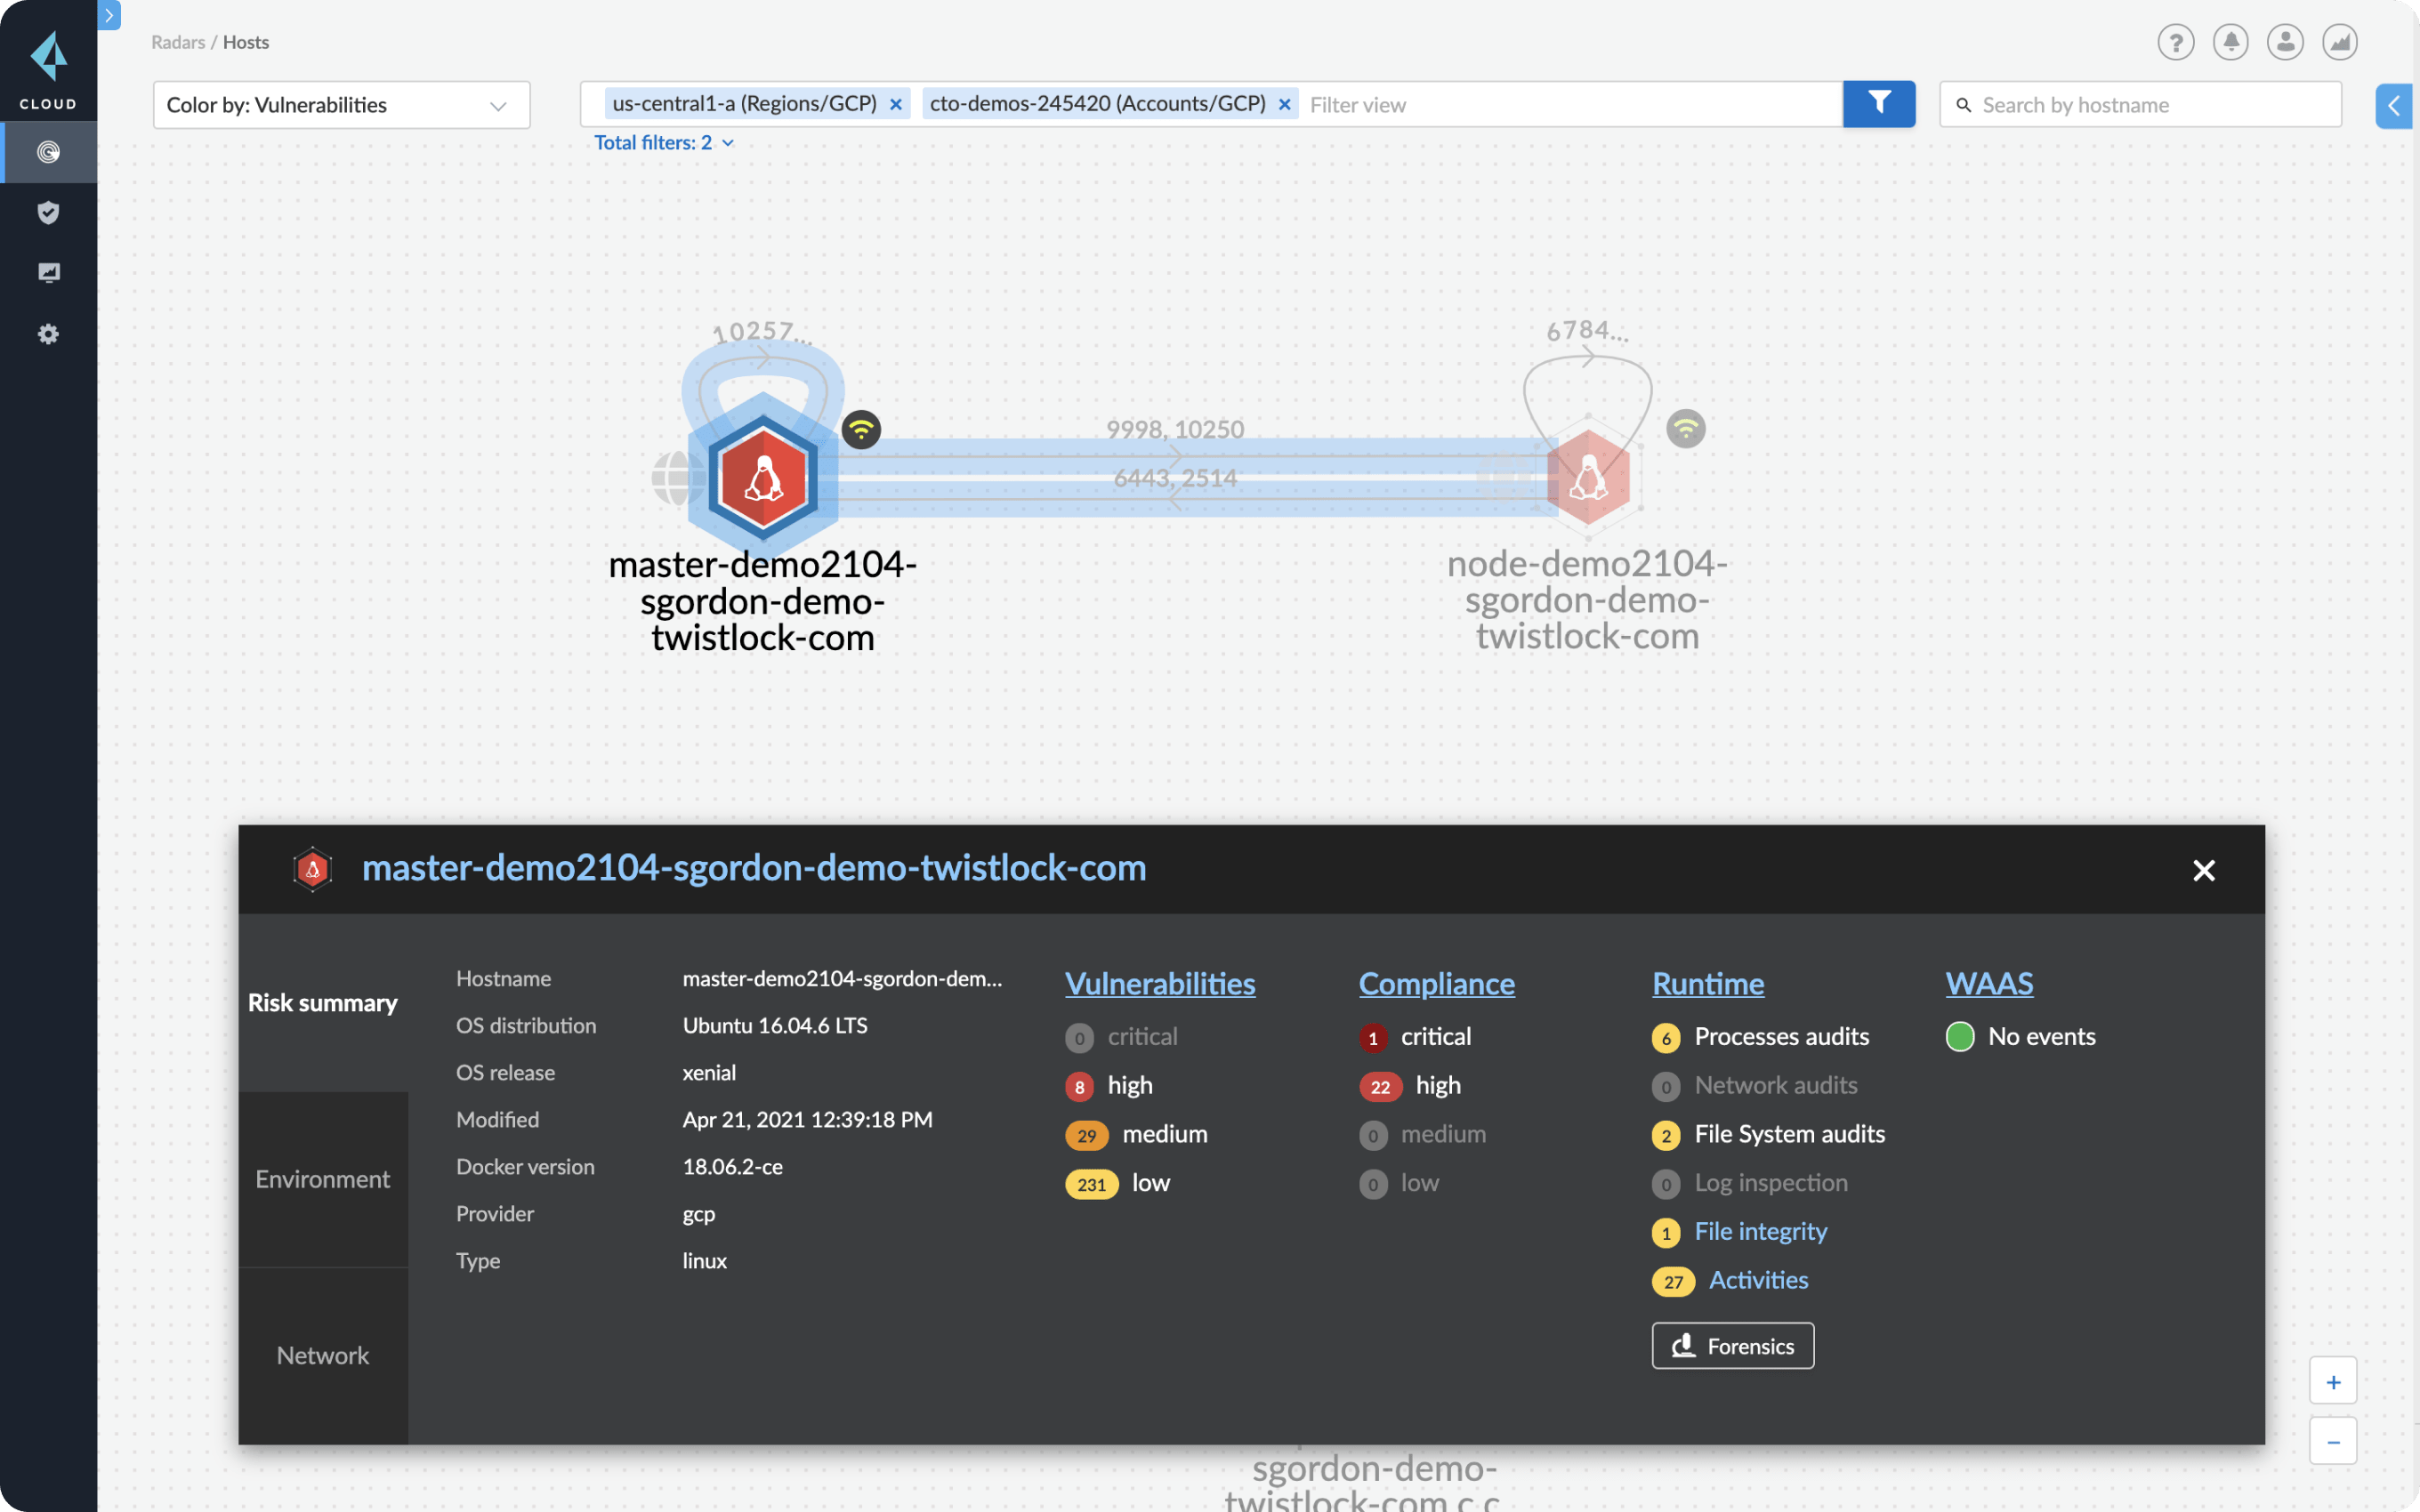 Host Security Hero Front Image